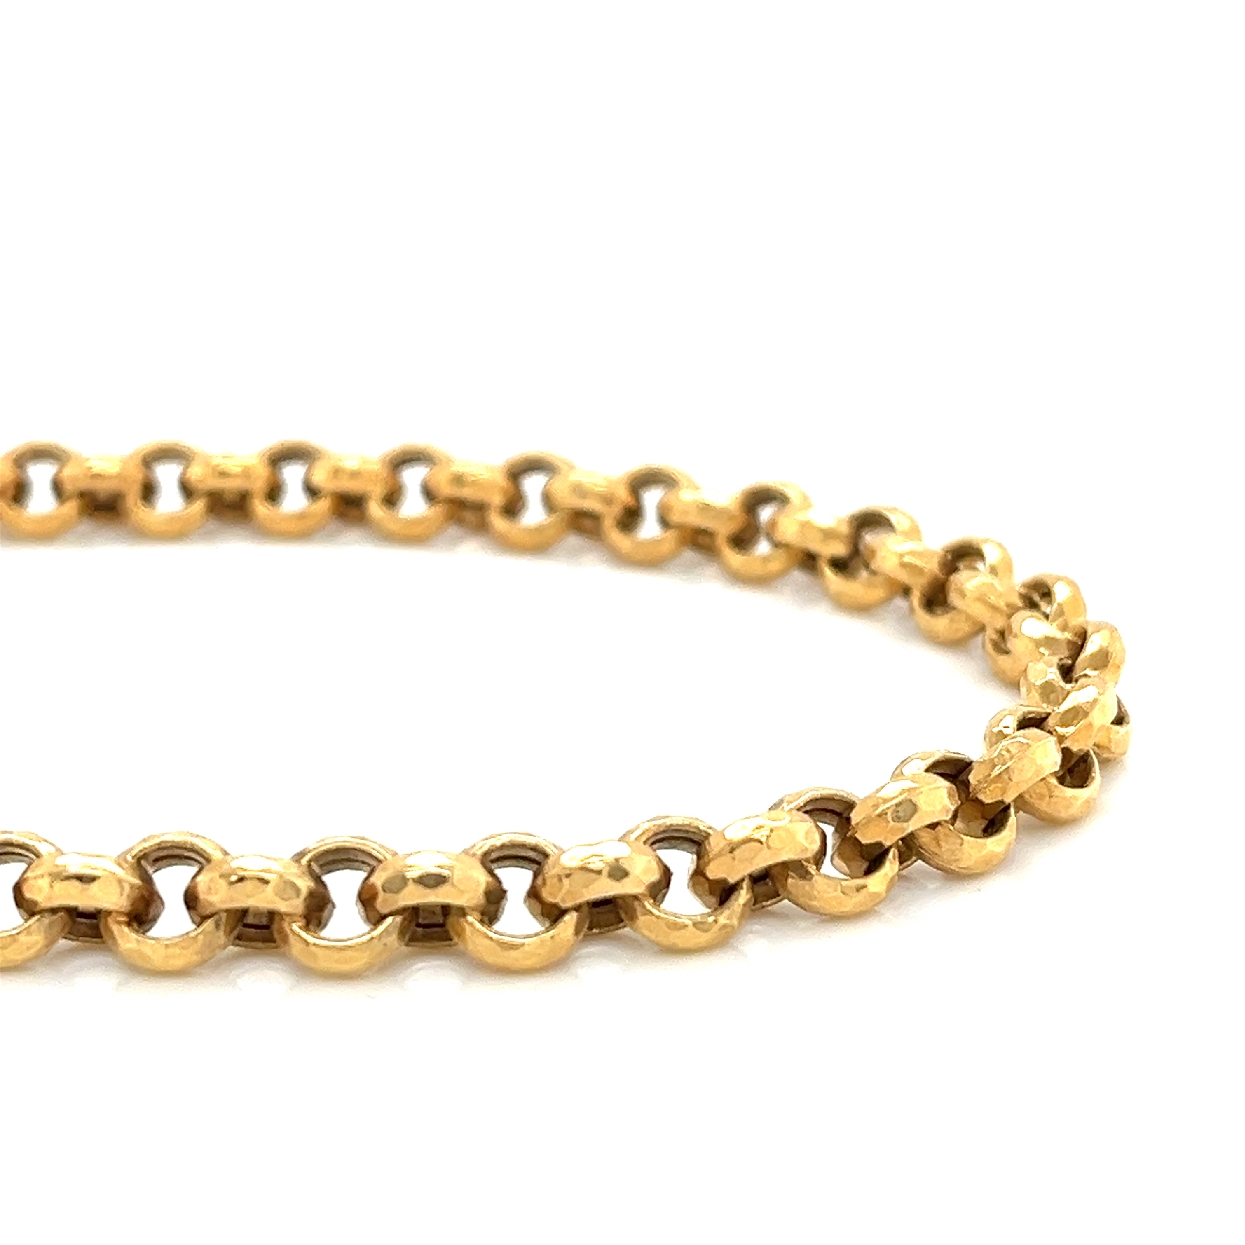 14 kt large rolo link chain 20 inches